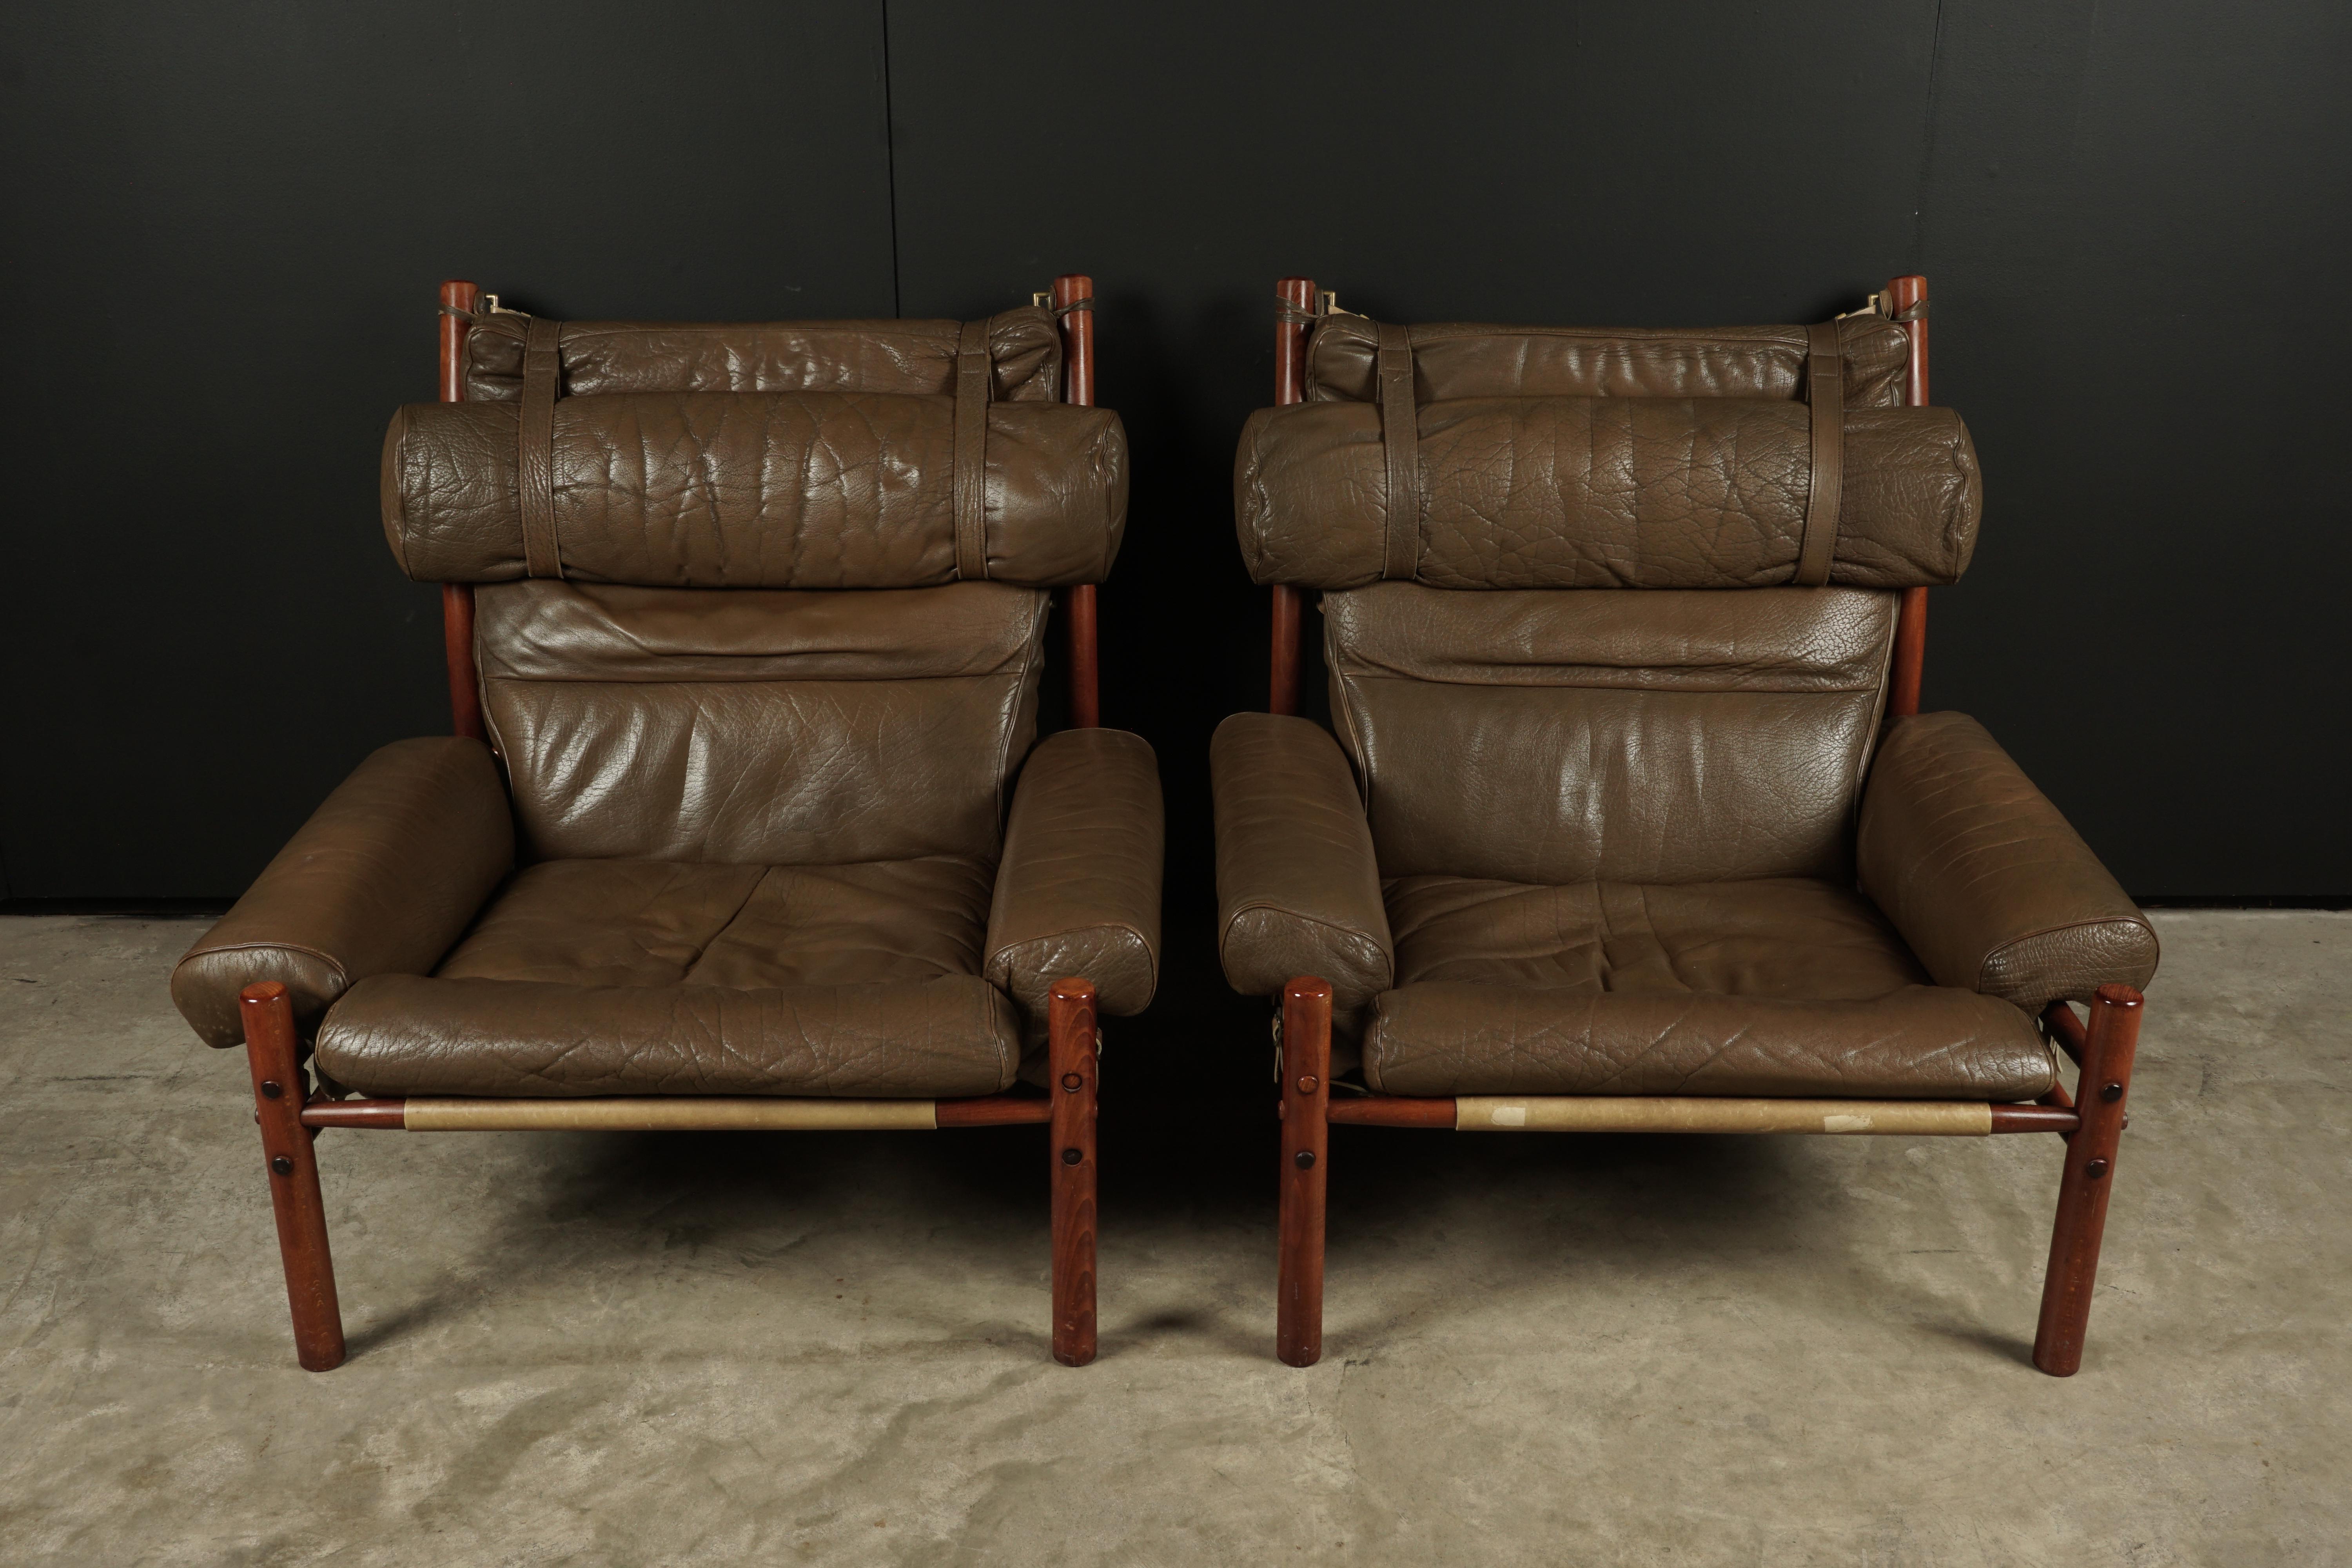 Pair of Arne Norell lounge chairs, model Inca, circa 1960. Original brown leather on a solid birch frame. Produced by Arne Norell AB, Aneby Sweden.